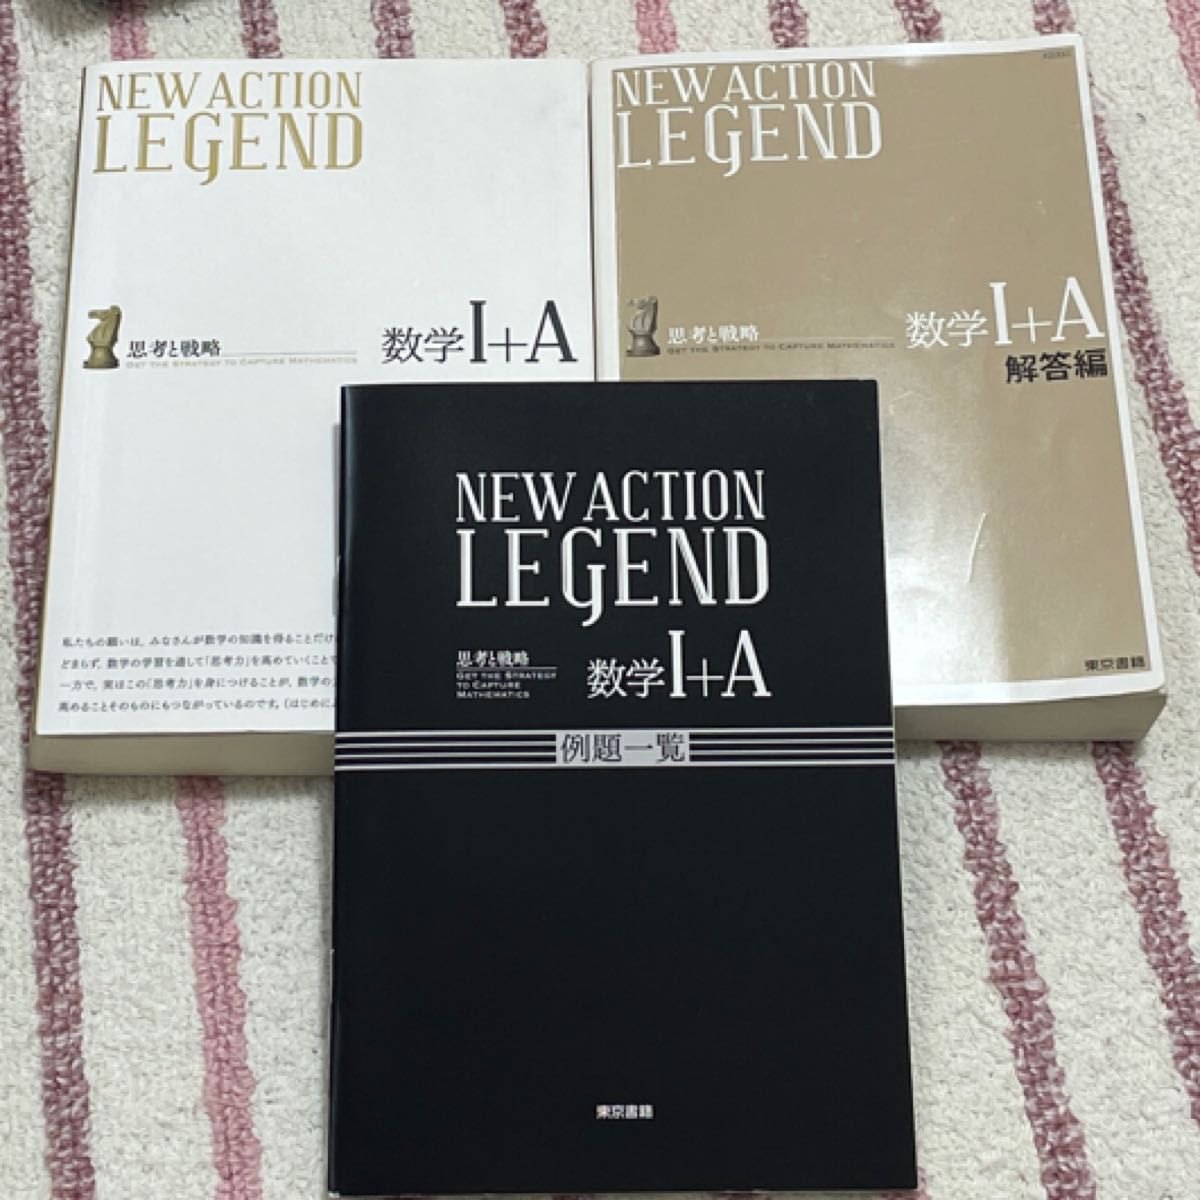 NEW ACTION LEGEND数学1+A（問題、解答） - その他